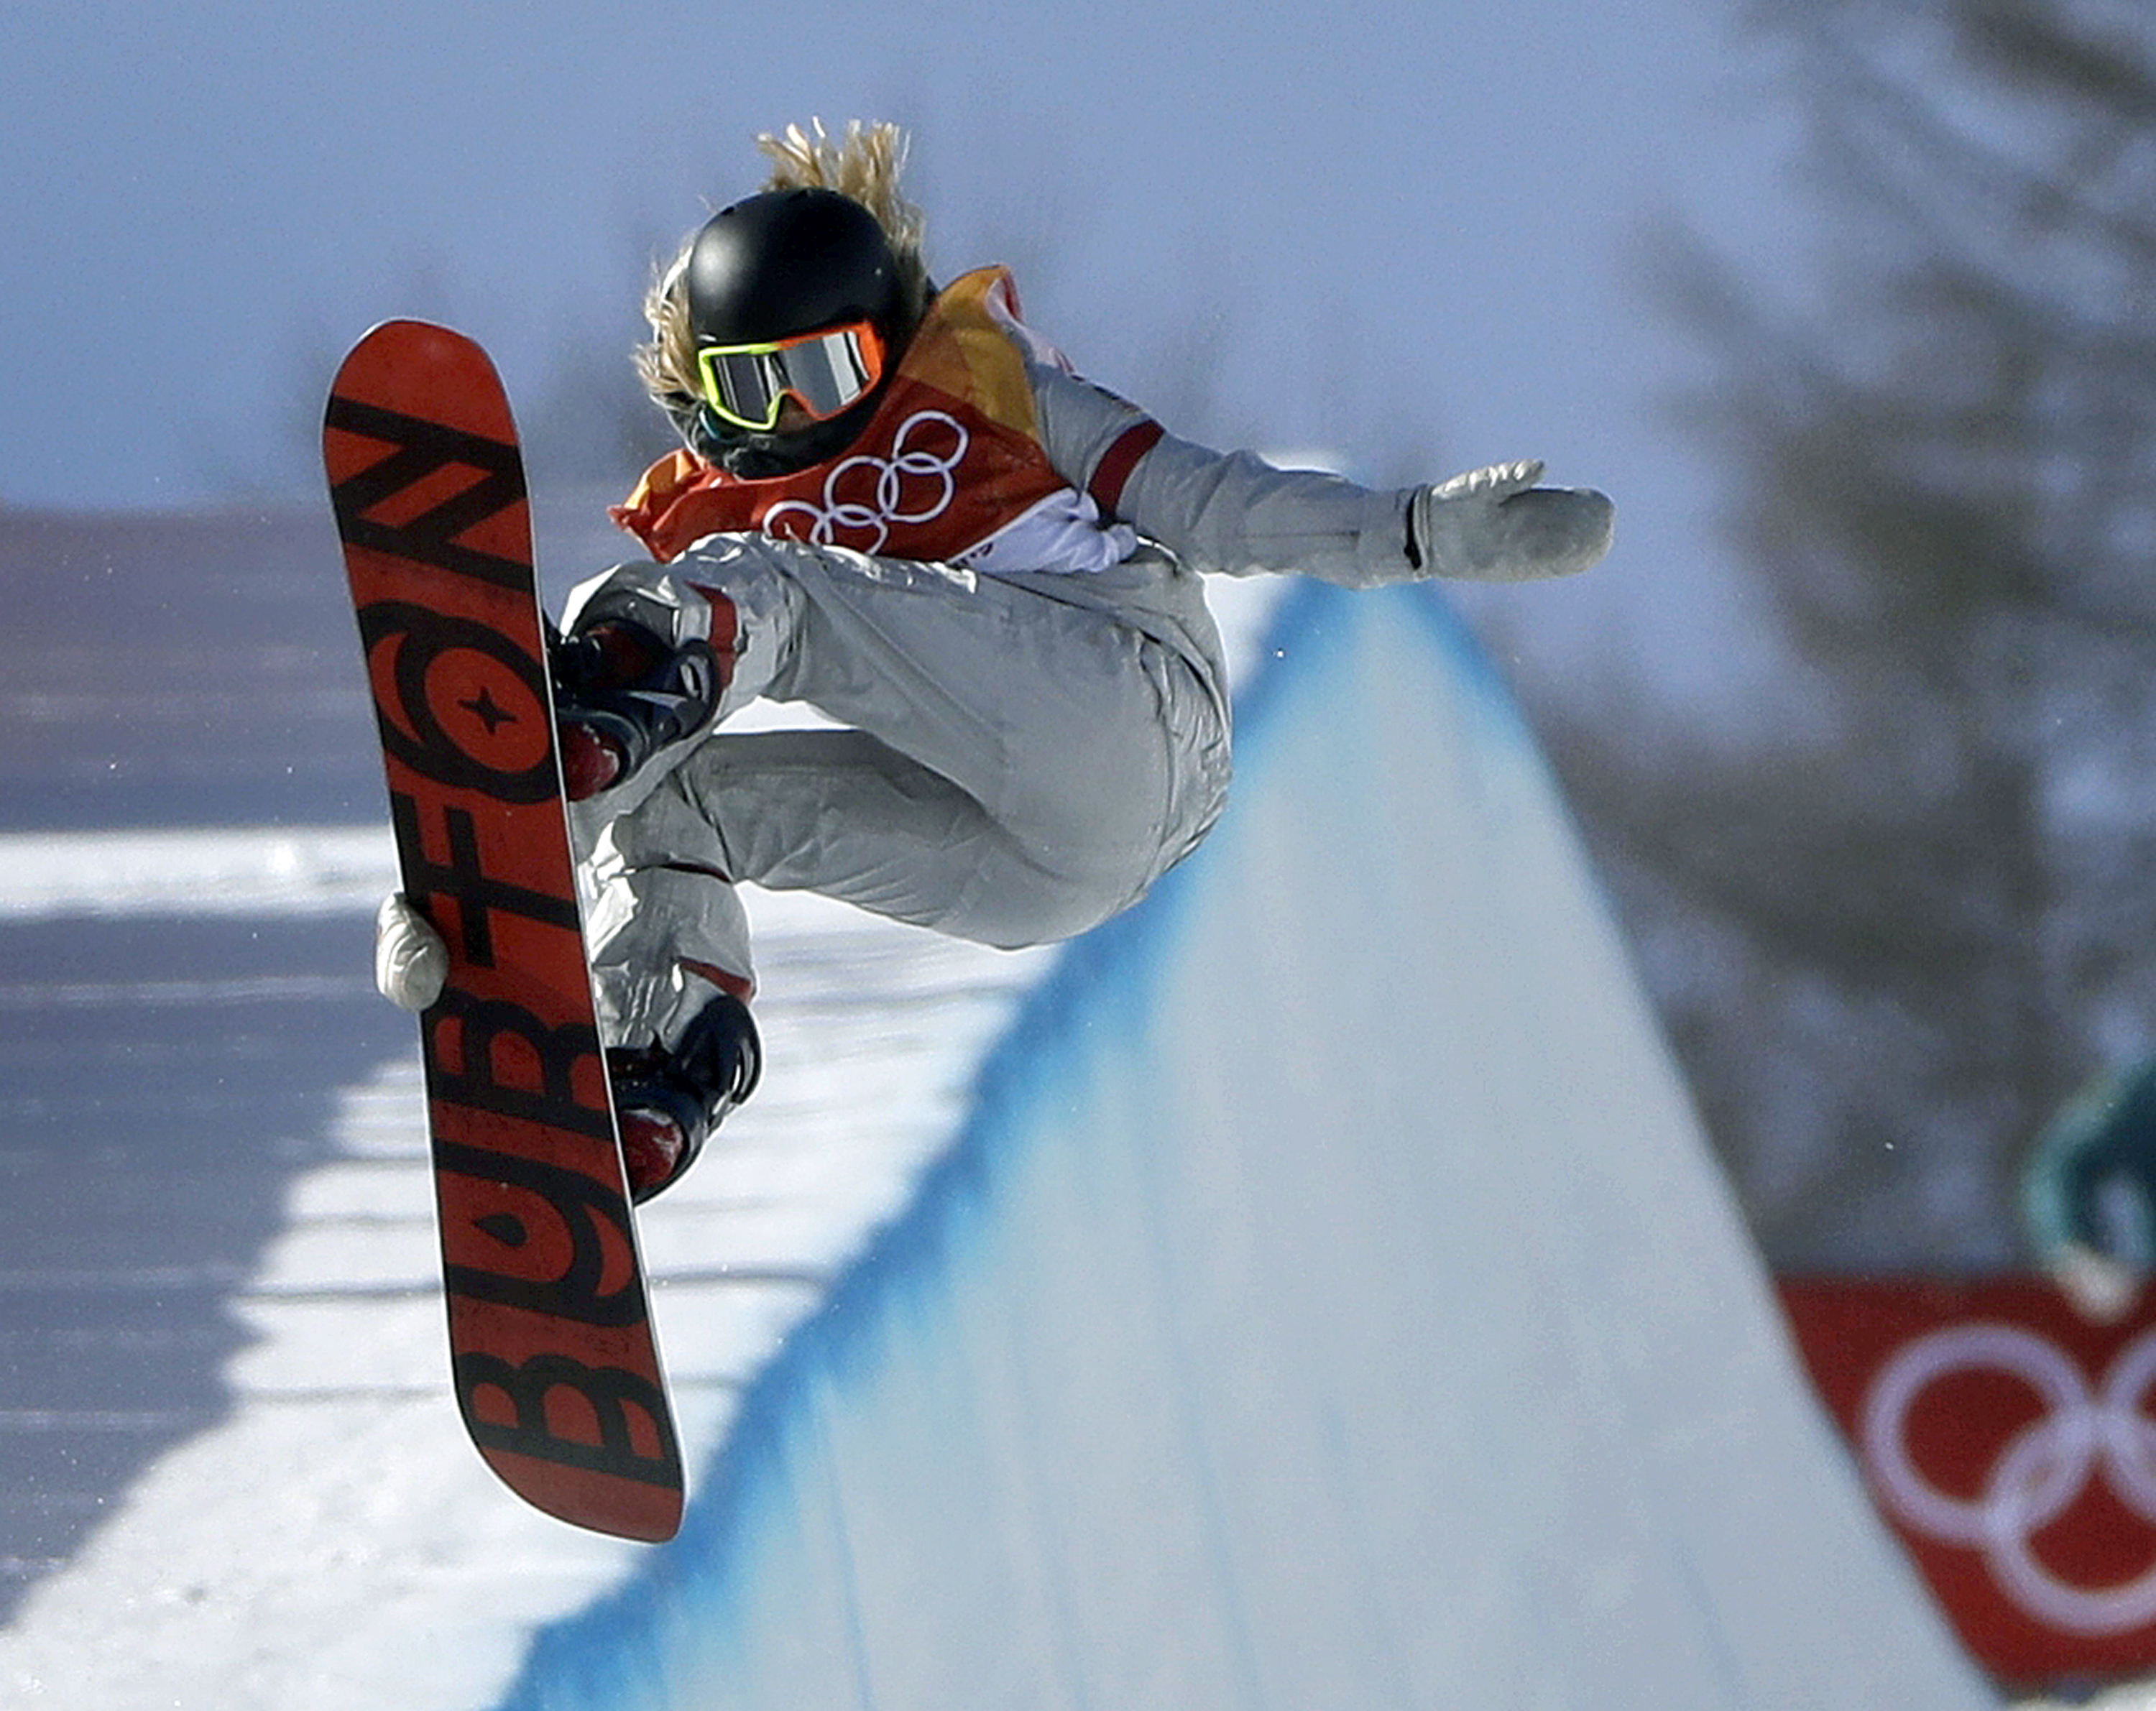 Winter Olympics Snowboarding schedule Live stream, start time, TV channel, how to watch Team USA